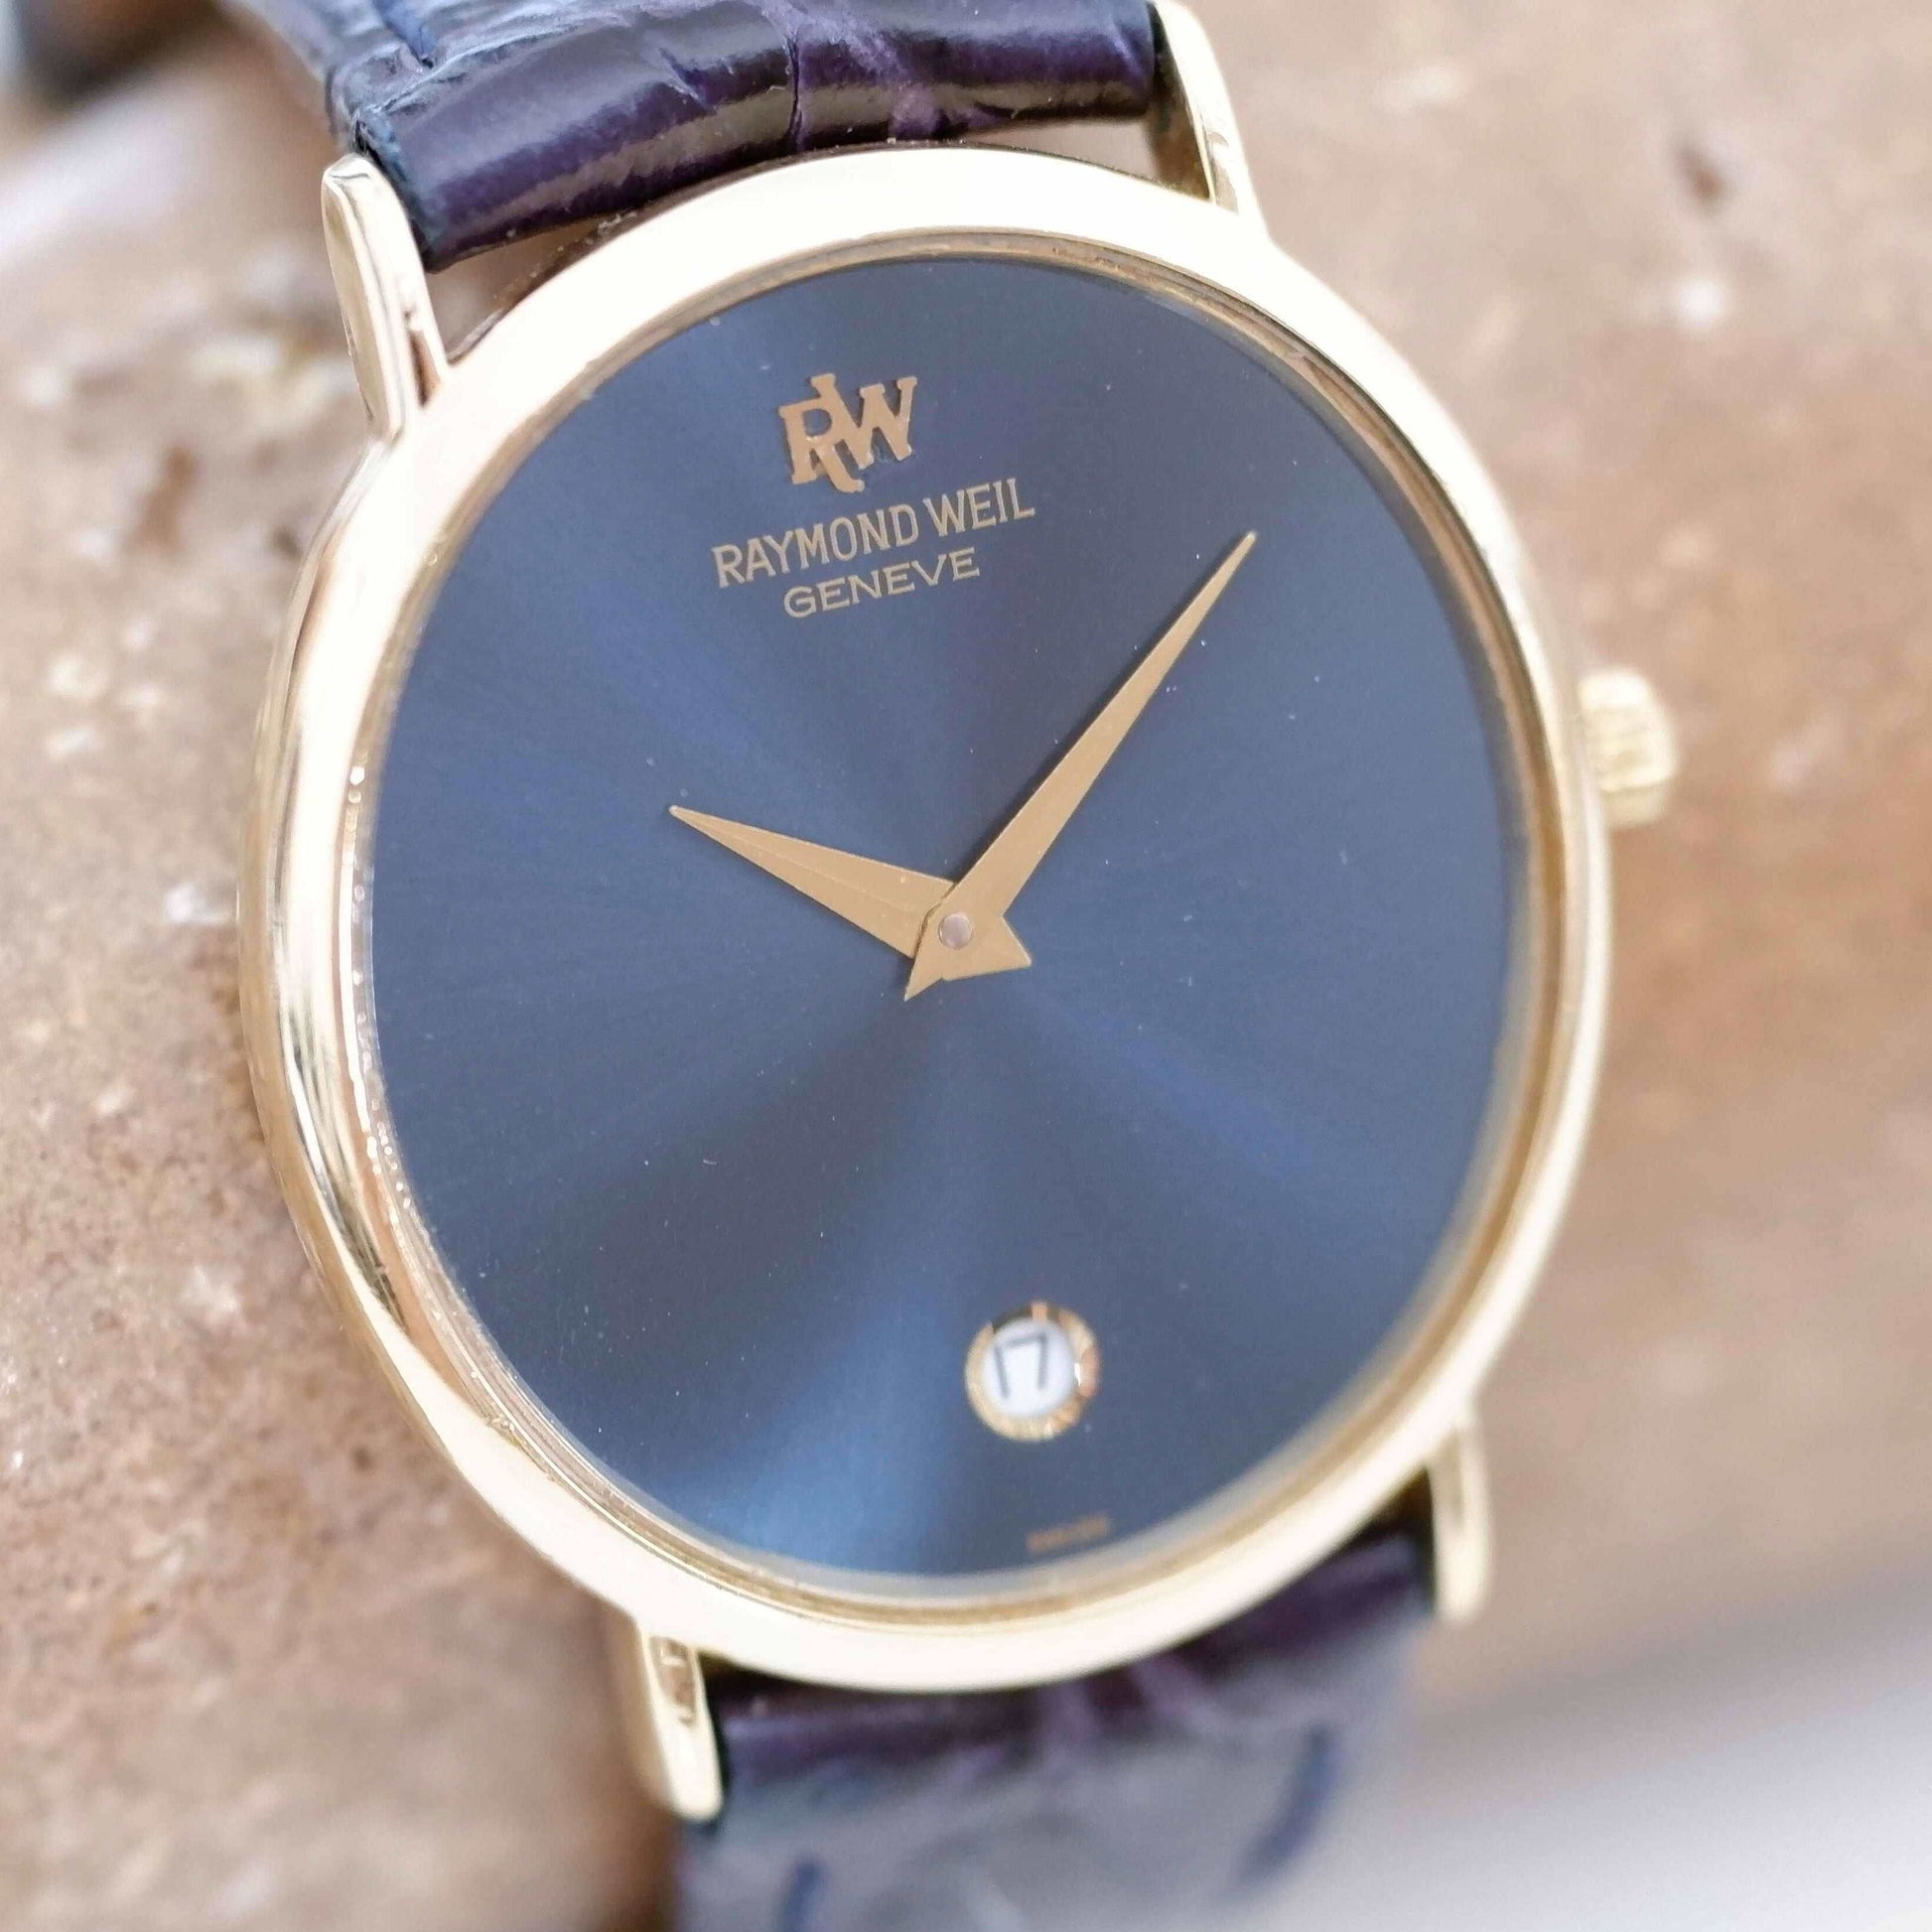 Raymond Weil Vintage Ladies Watch: 90s Golden Oval Style with Blue Sunburst Dial, First Slight Left Side